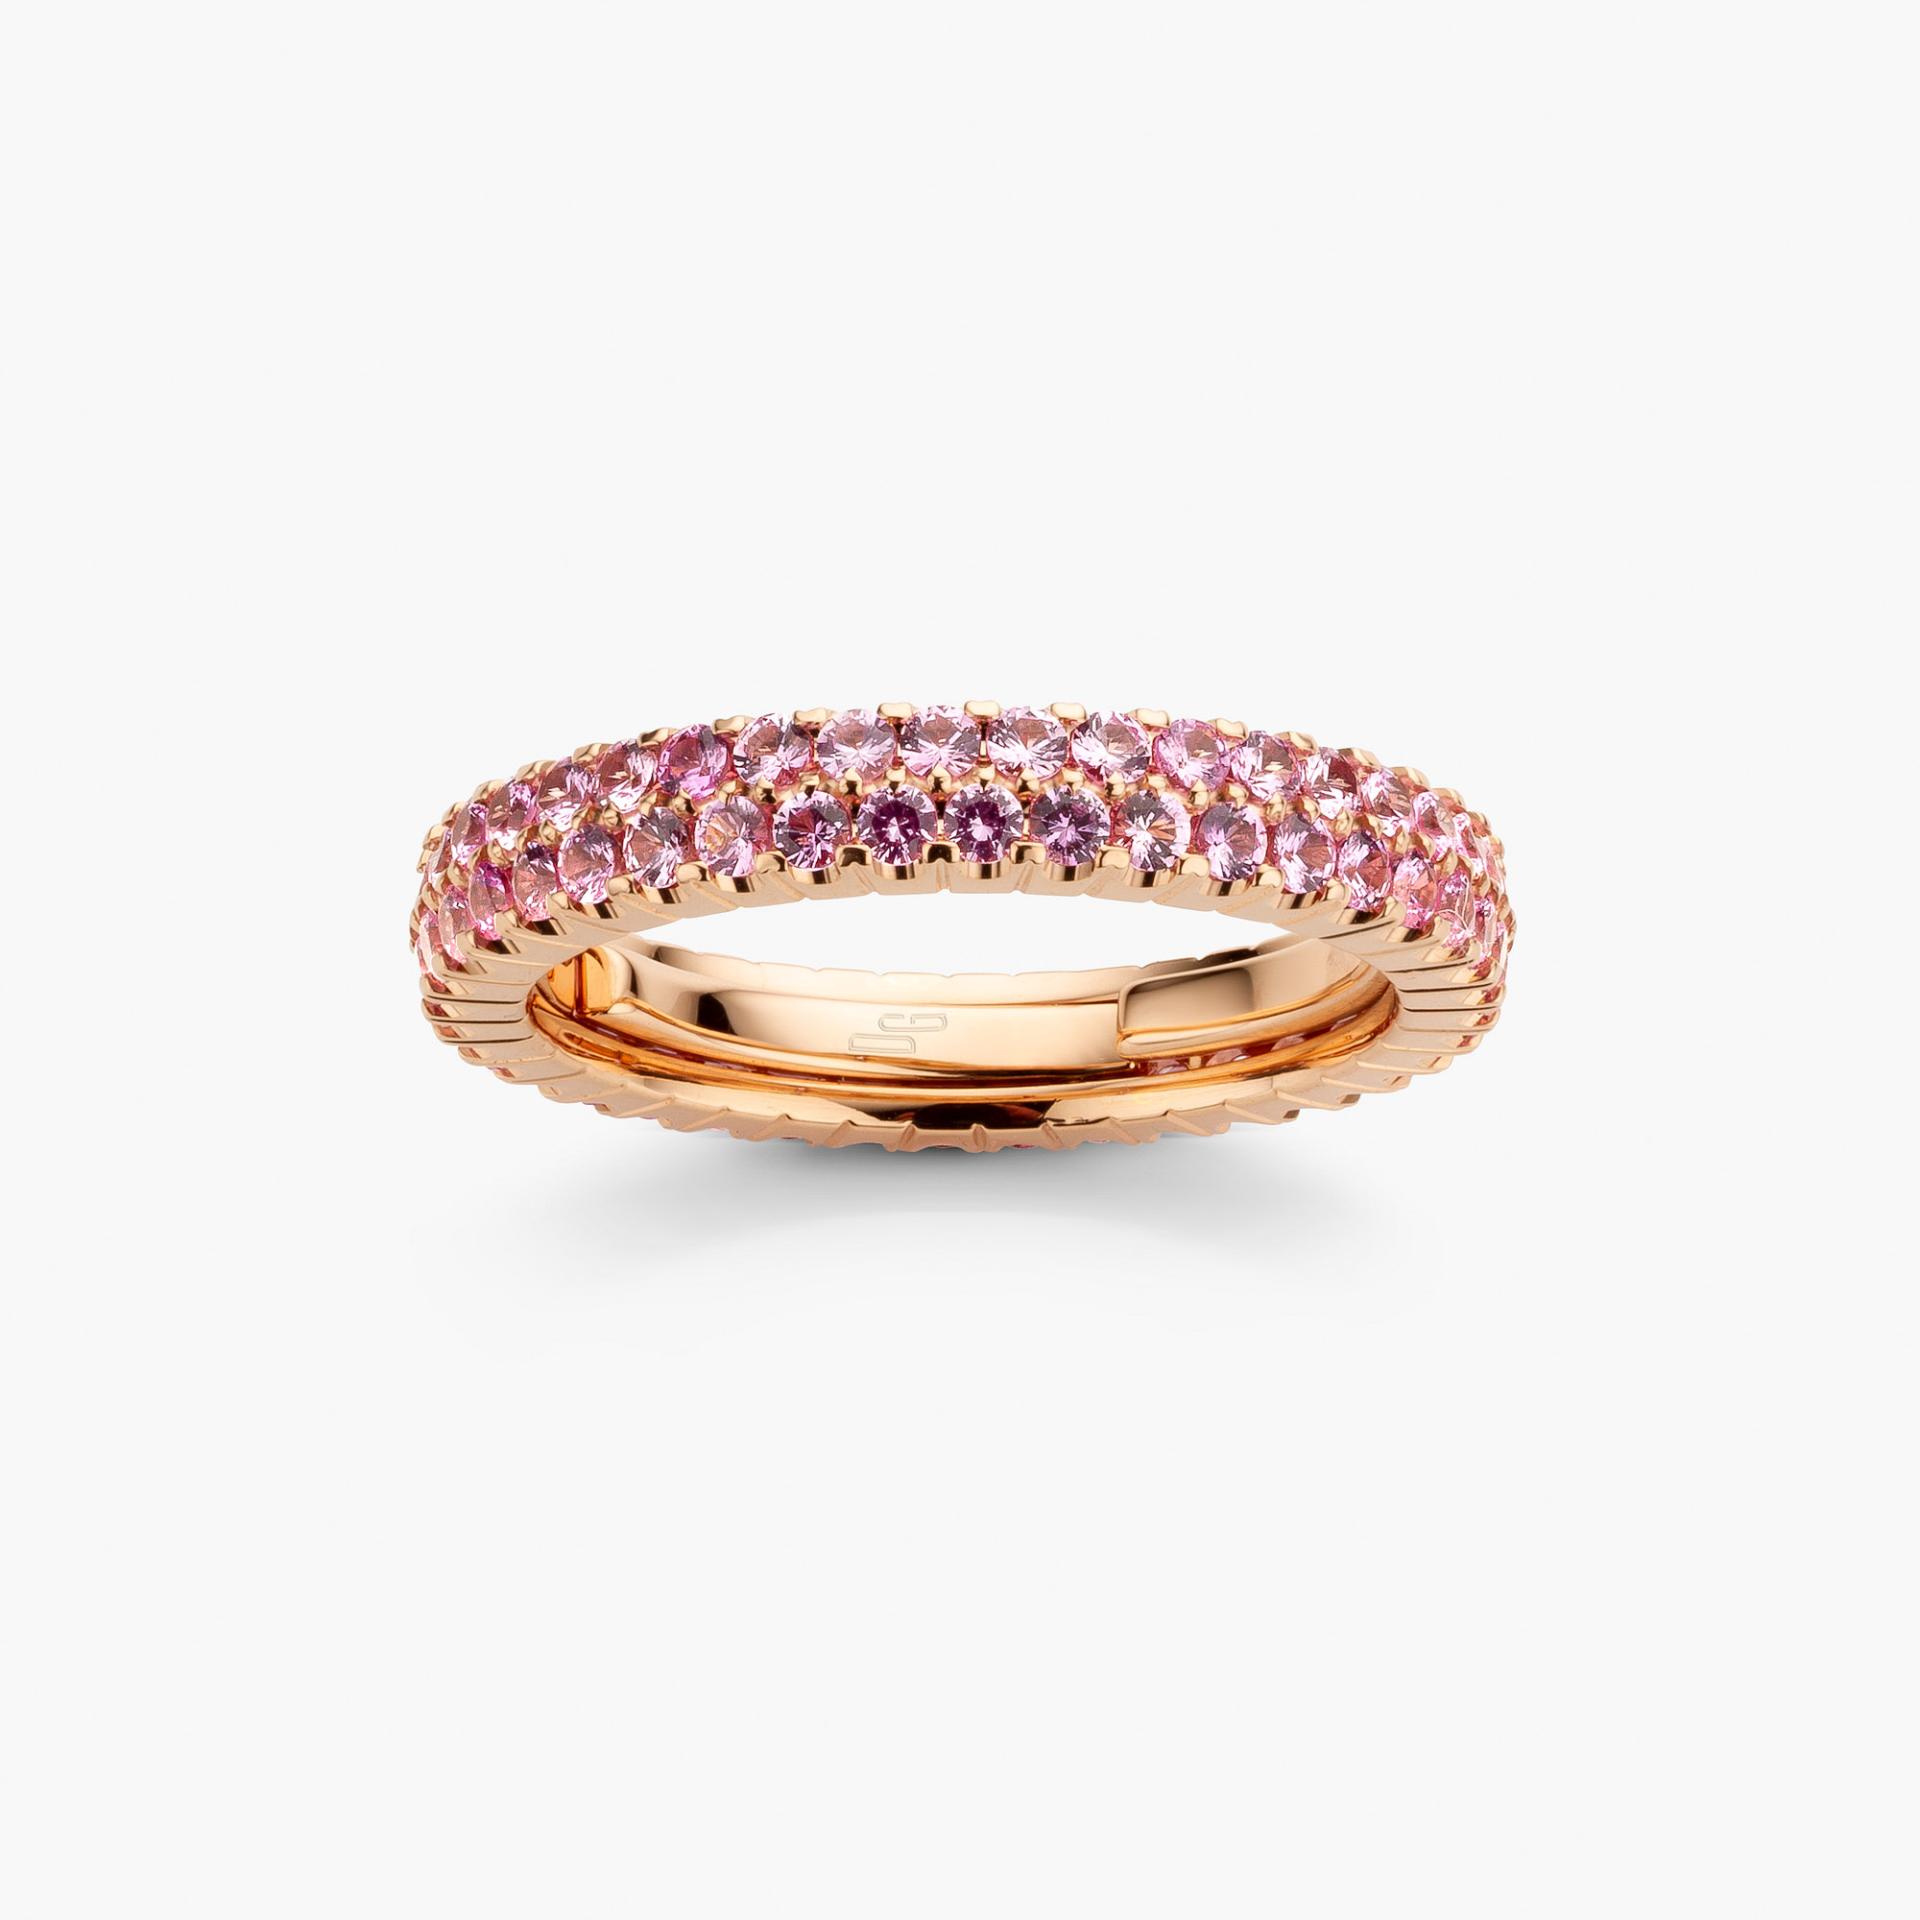 Rose gold ring Extensible set with pink sapphires made by Roberto Demeglio